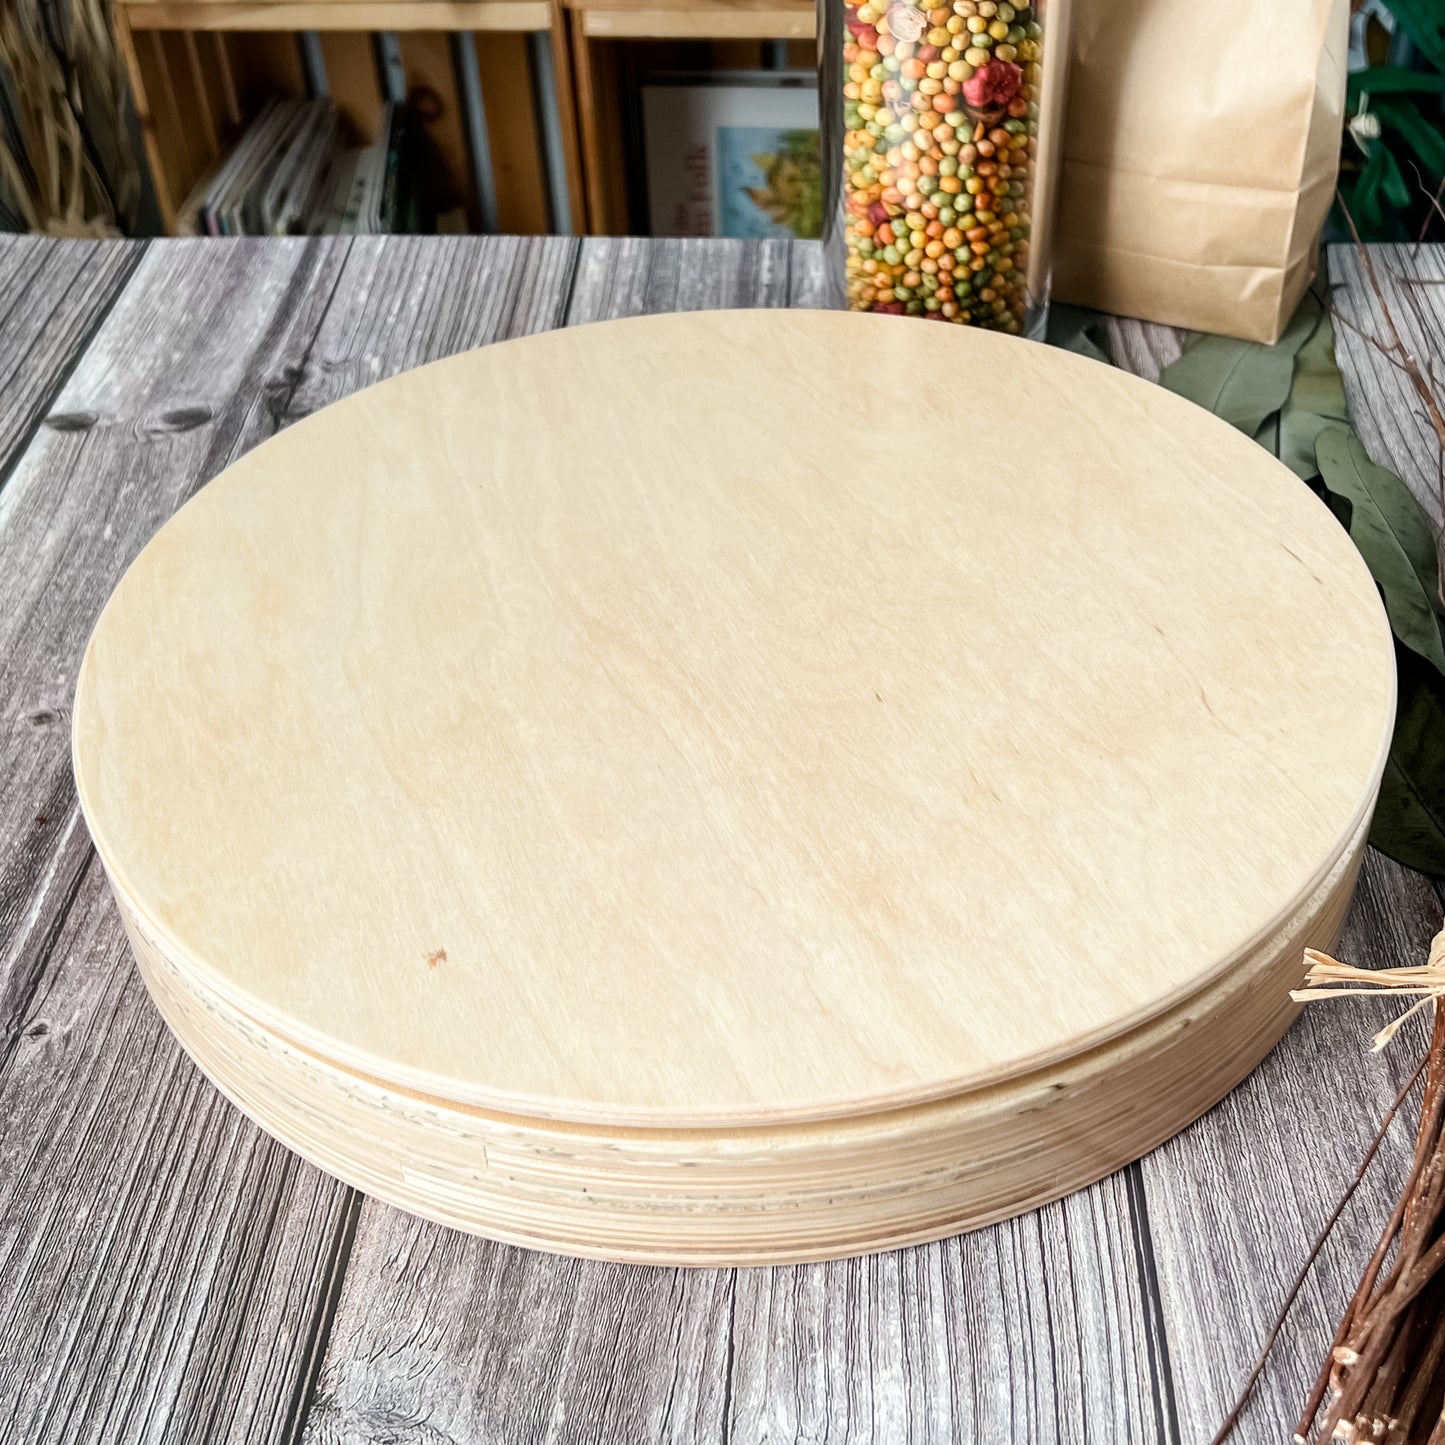 Round Birch Wood Sensory Trays and Lid (sold separately) - Chickadees Wooden Toys